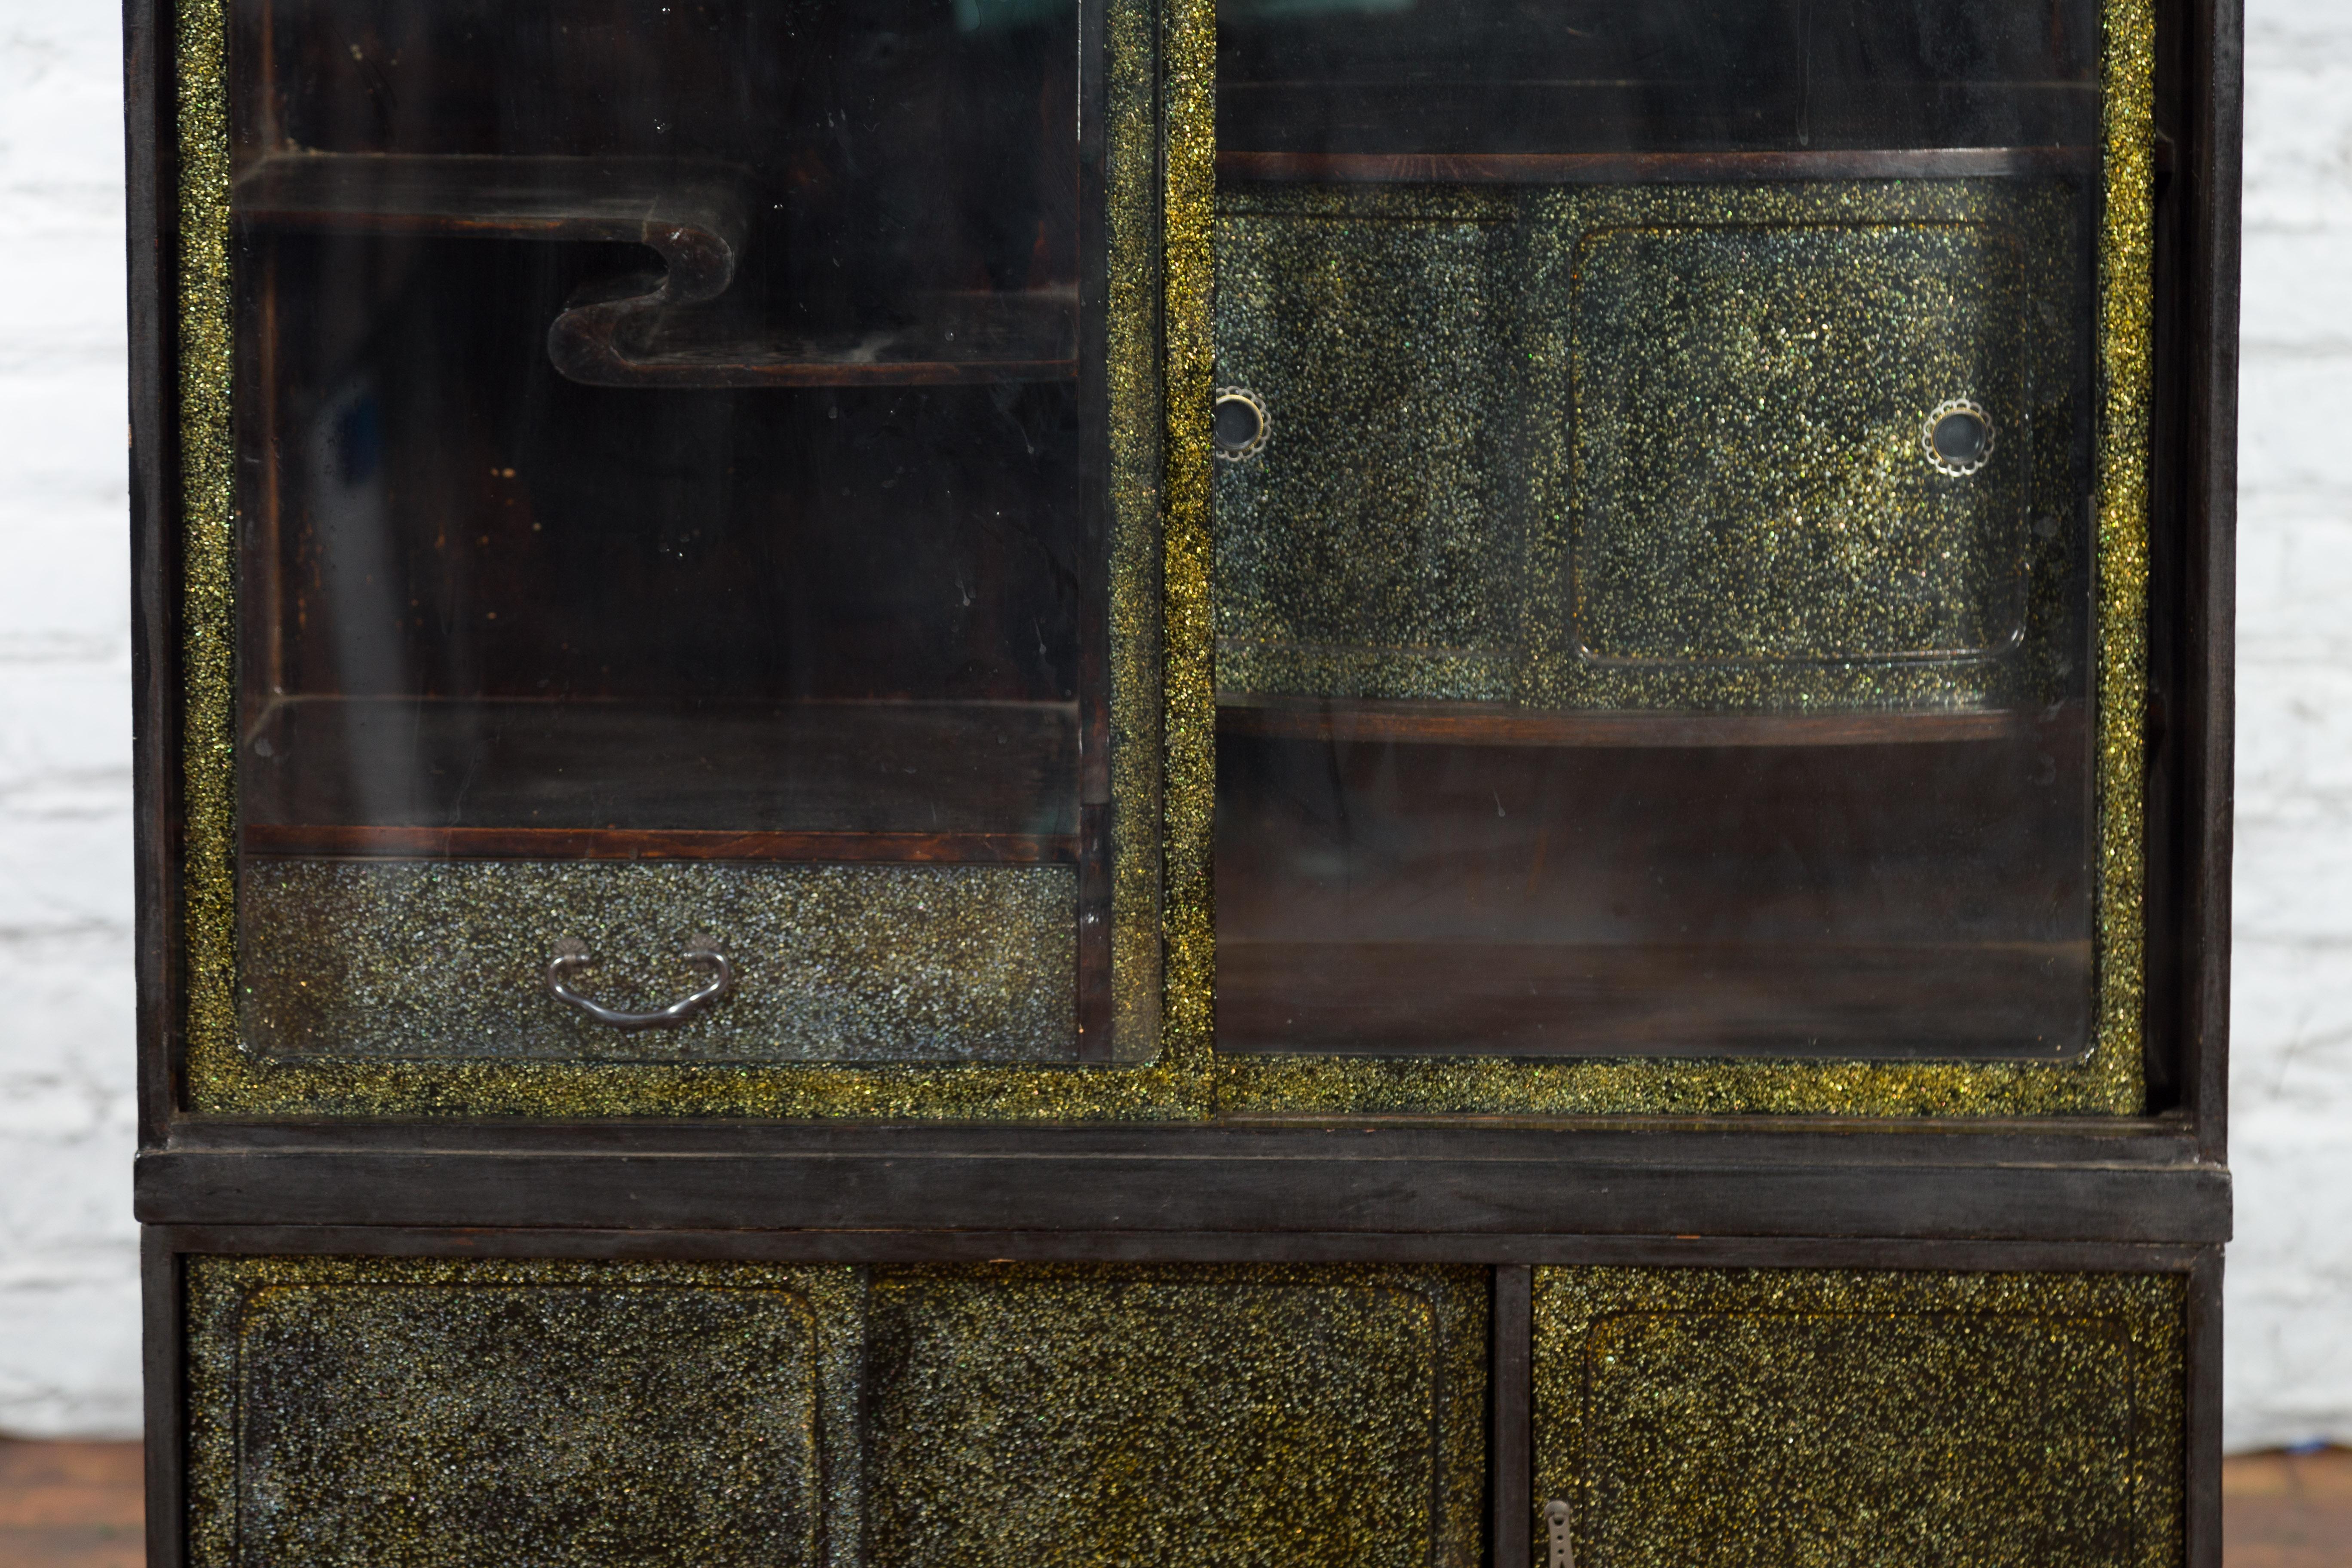 A Japanese compound cabinet from the early 20th century with black and gold speckled finish and glass sliding doors. Created in Japan during the early years of the 20th century, this compound cabinet features a linear silhouette perfectly